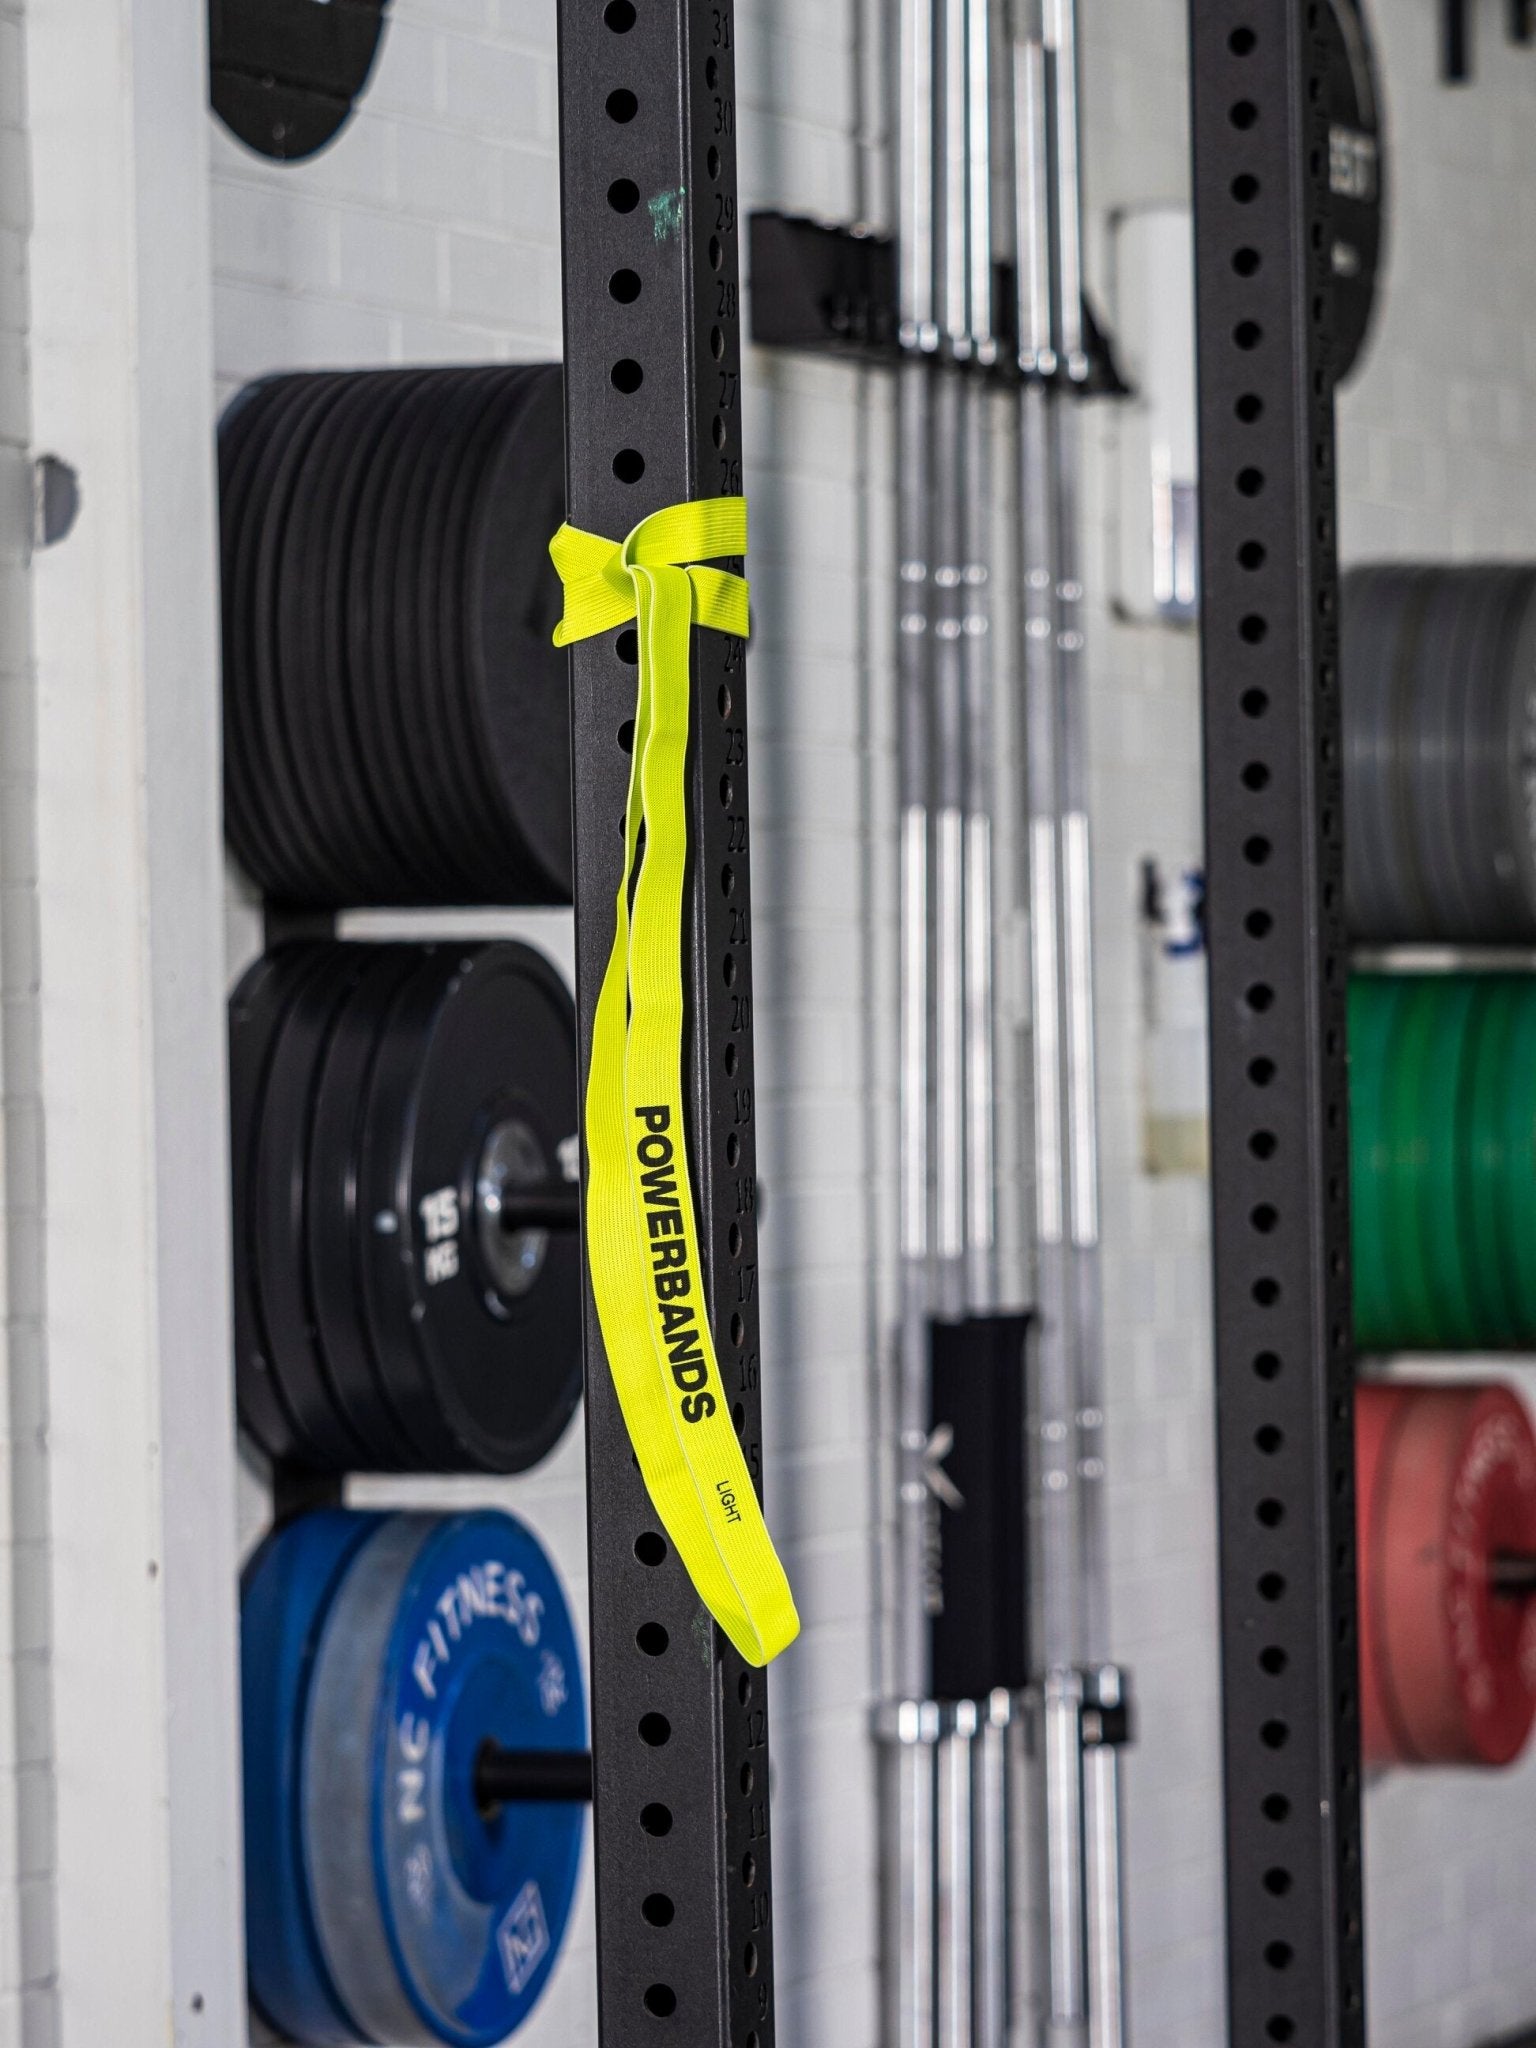 Using Resistance Bands for Your Circuit Training Exercise - POWERBANDS®